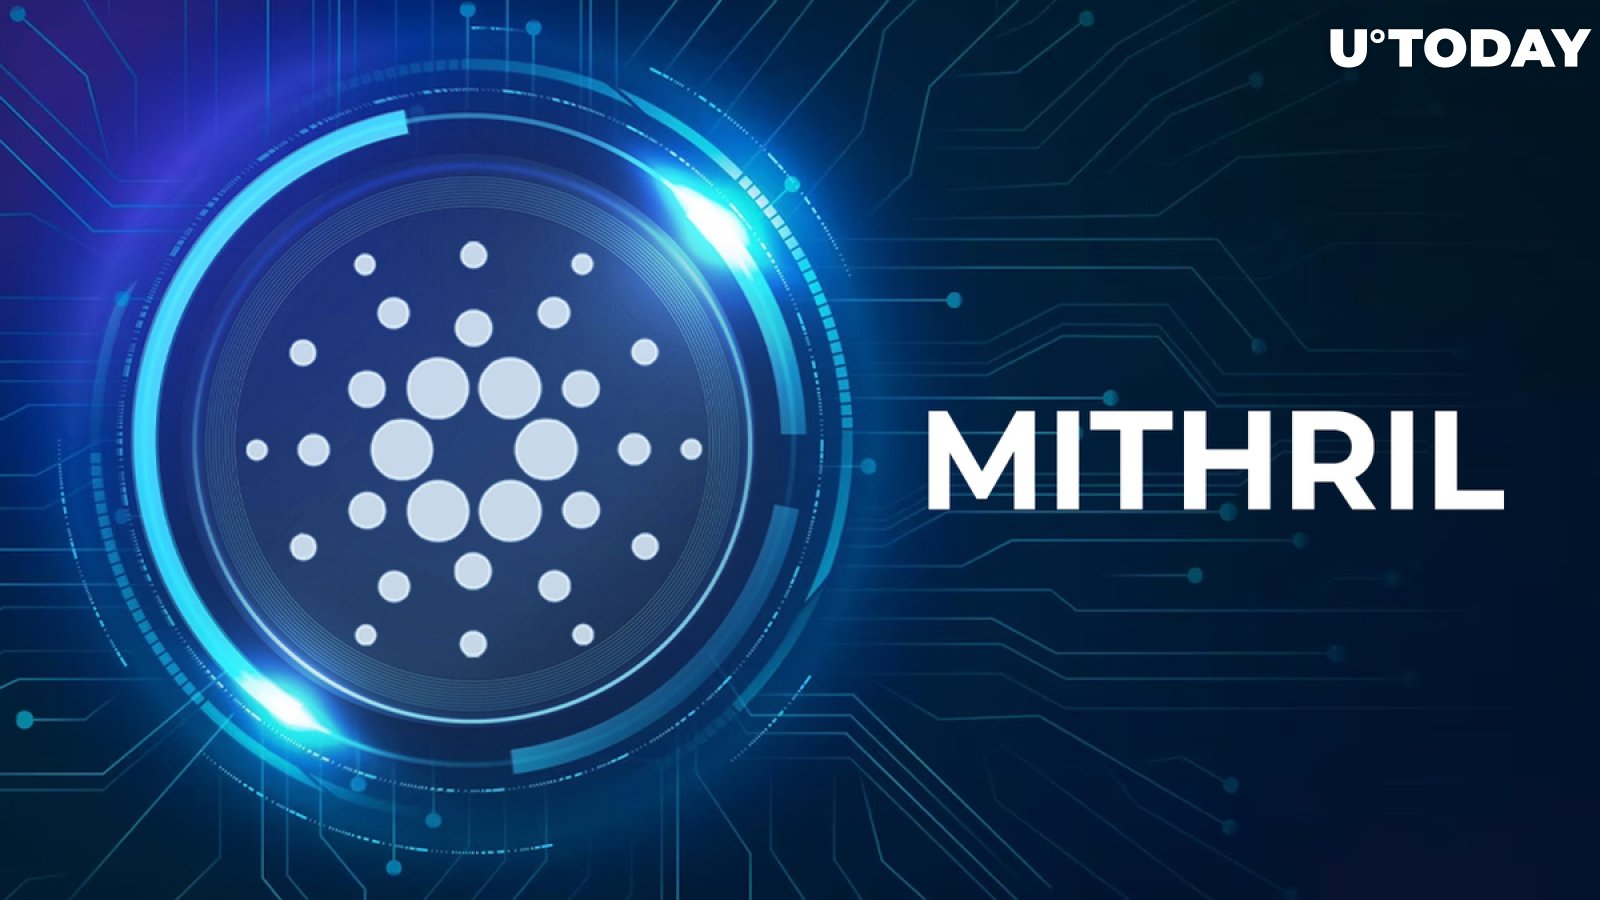 Cardano's Mithril Nearly Ready for Mainnet Launch